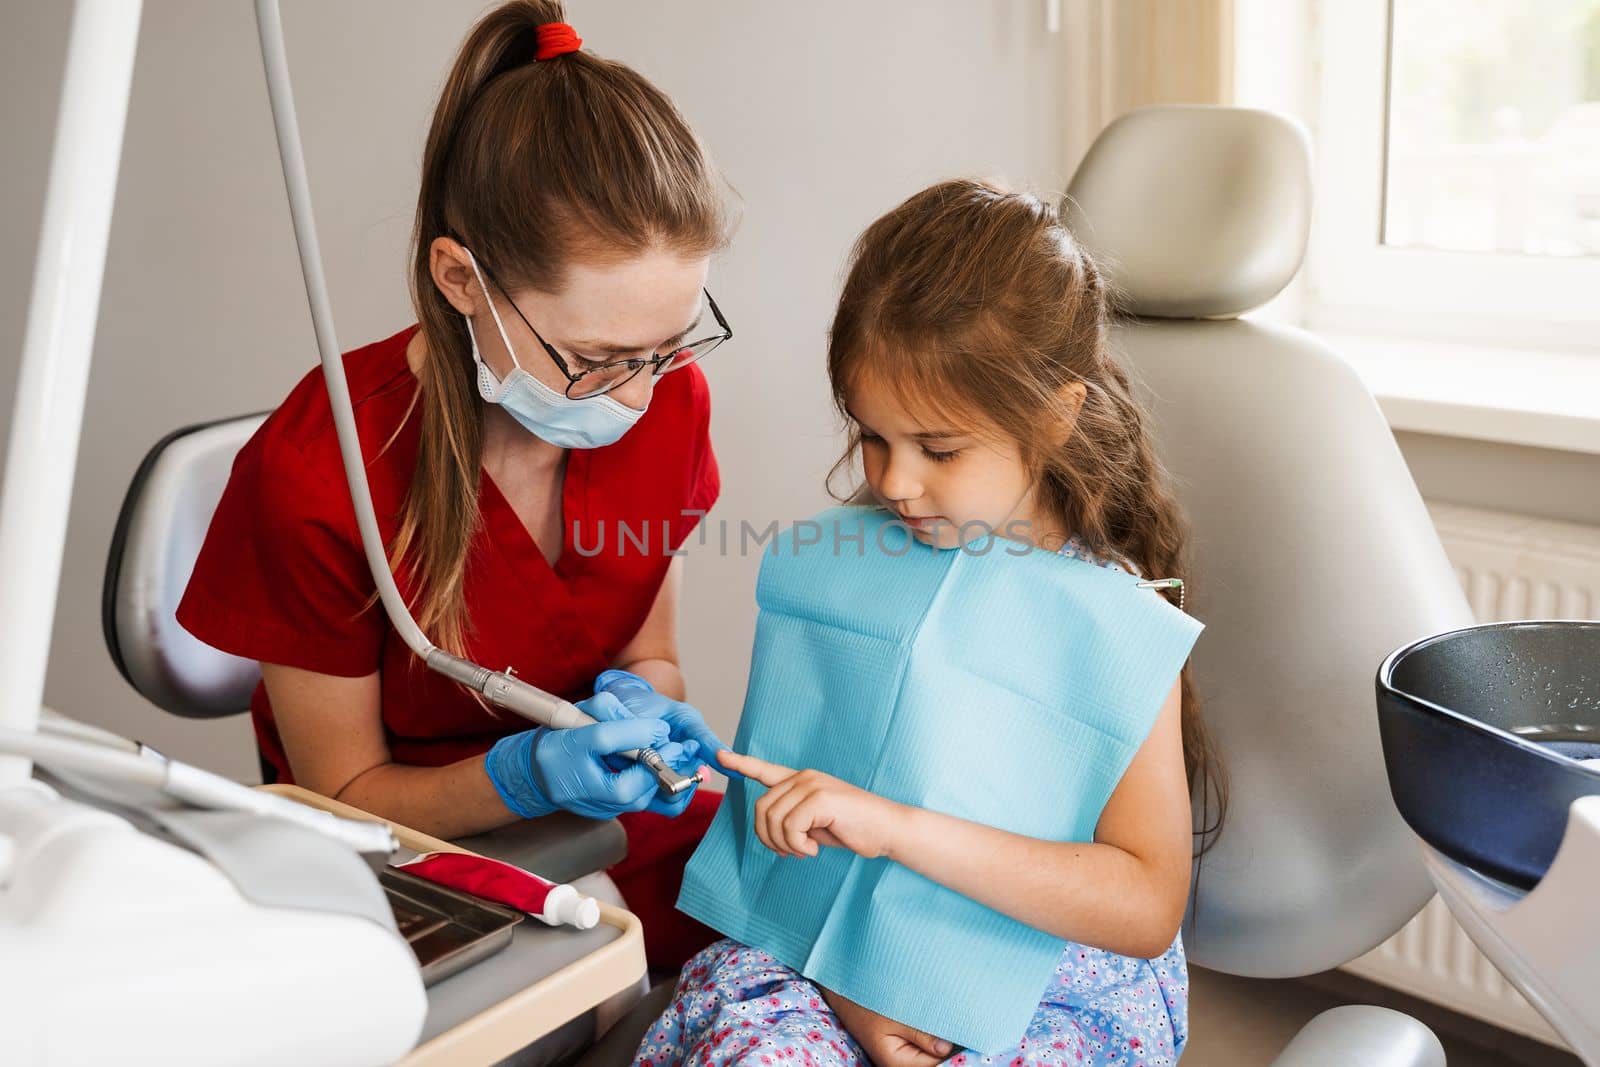 Professional hygiene for teeth of child in dentistry. Professional teeth cleaning for child girl. Pediatric dentist examines and consults kid patient in dentistry